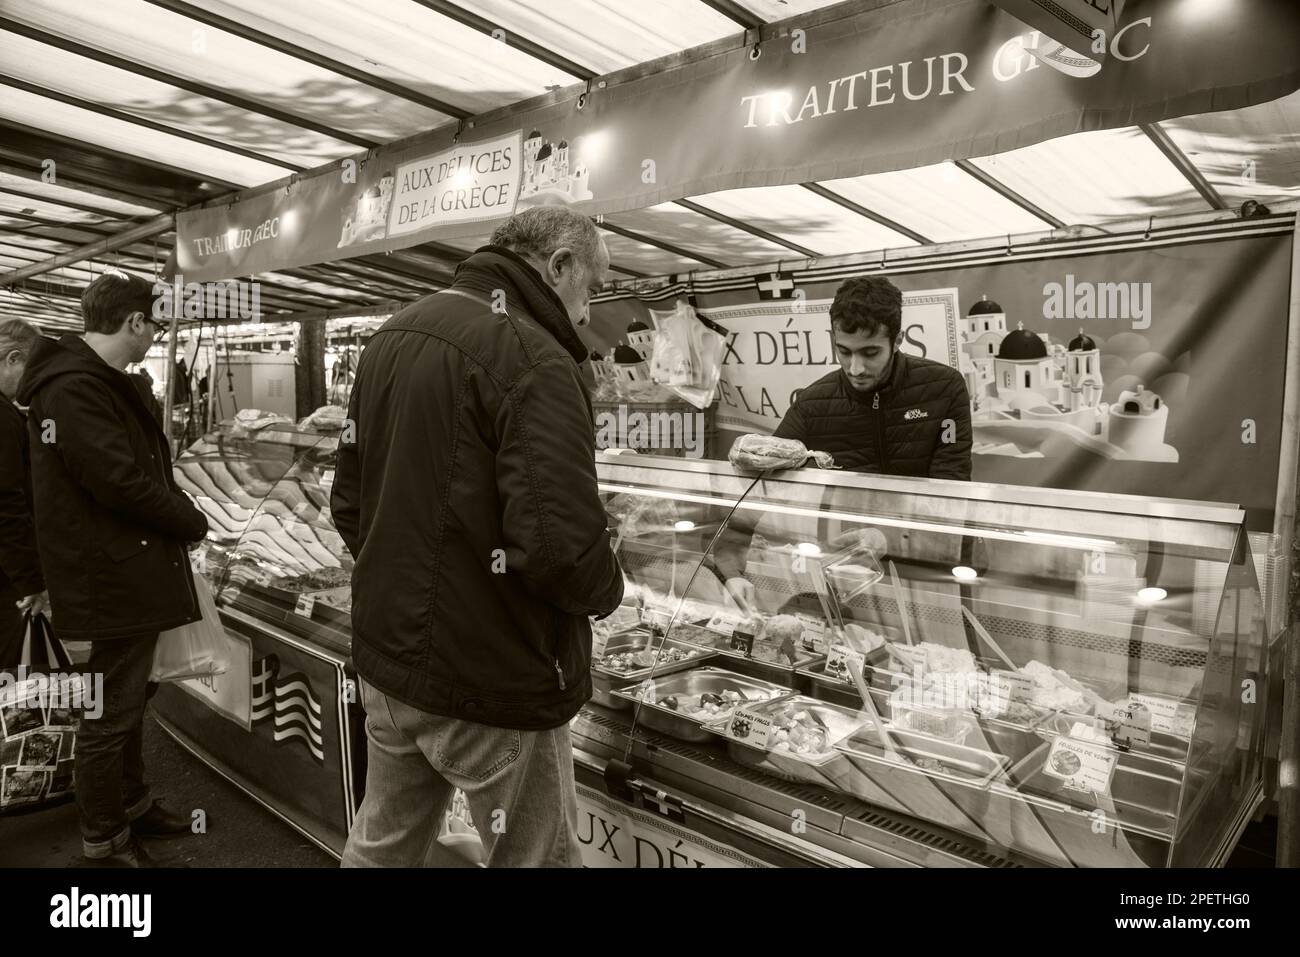 Saint-Maur-des-Fosses, France - October 8, 2022: People buy freshly prepared traditional dishes from Greek deli stall at a street market. Sepia photo. Stock Photo